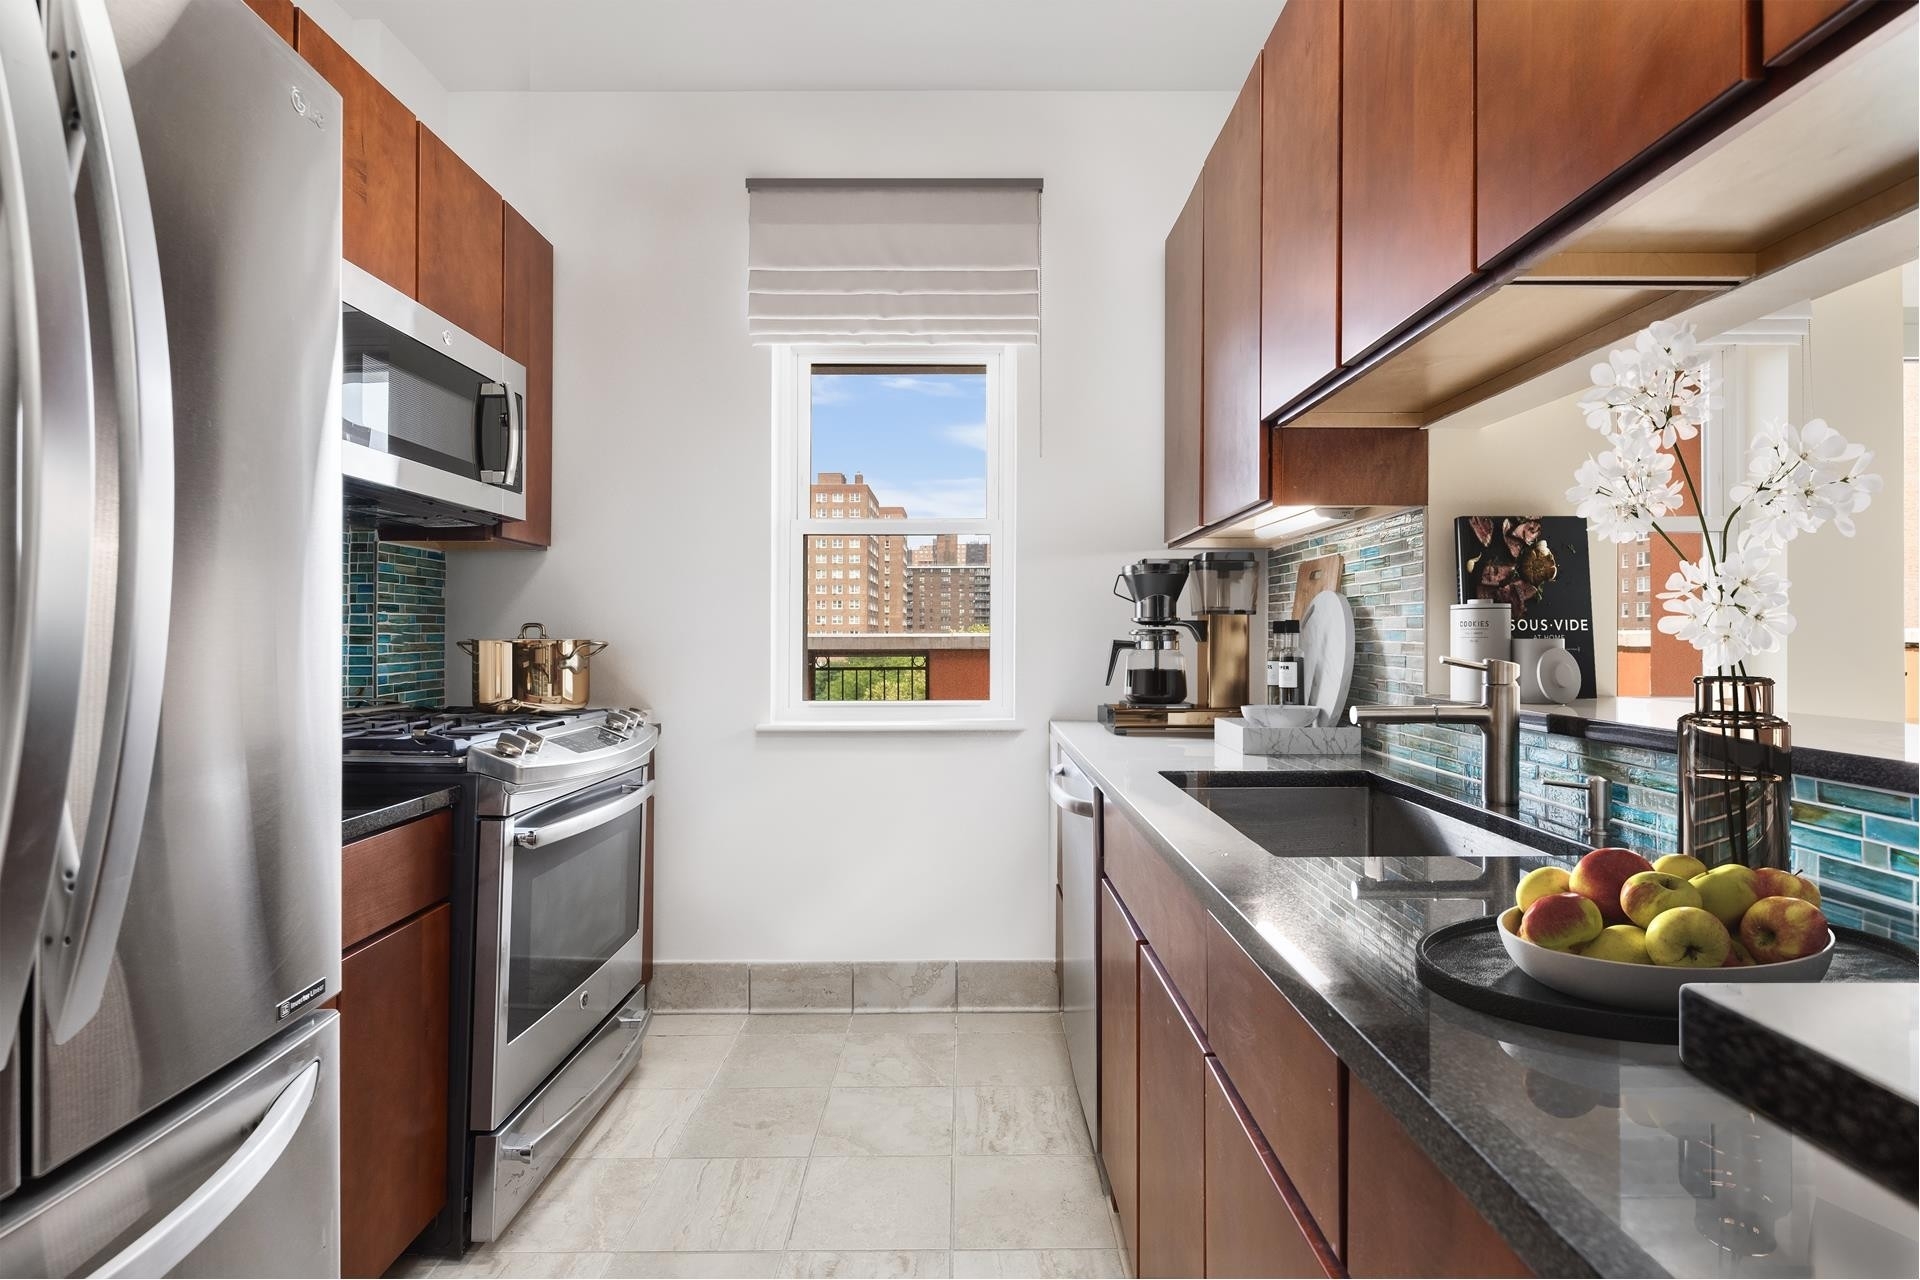 3. Condominiums at 70 West 139th St, 8D New York